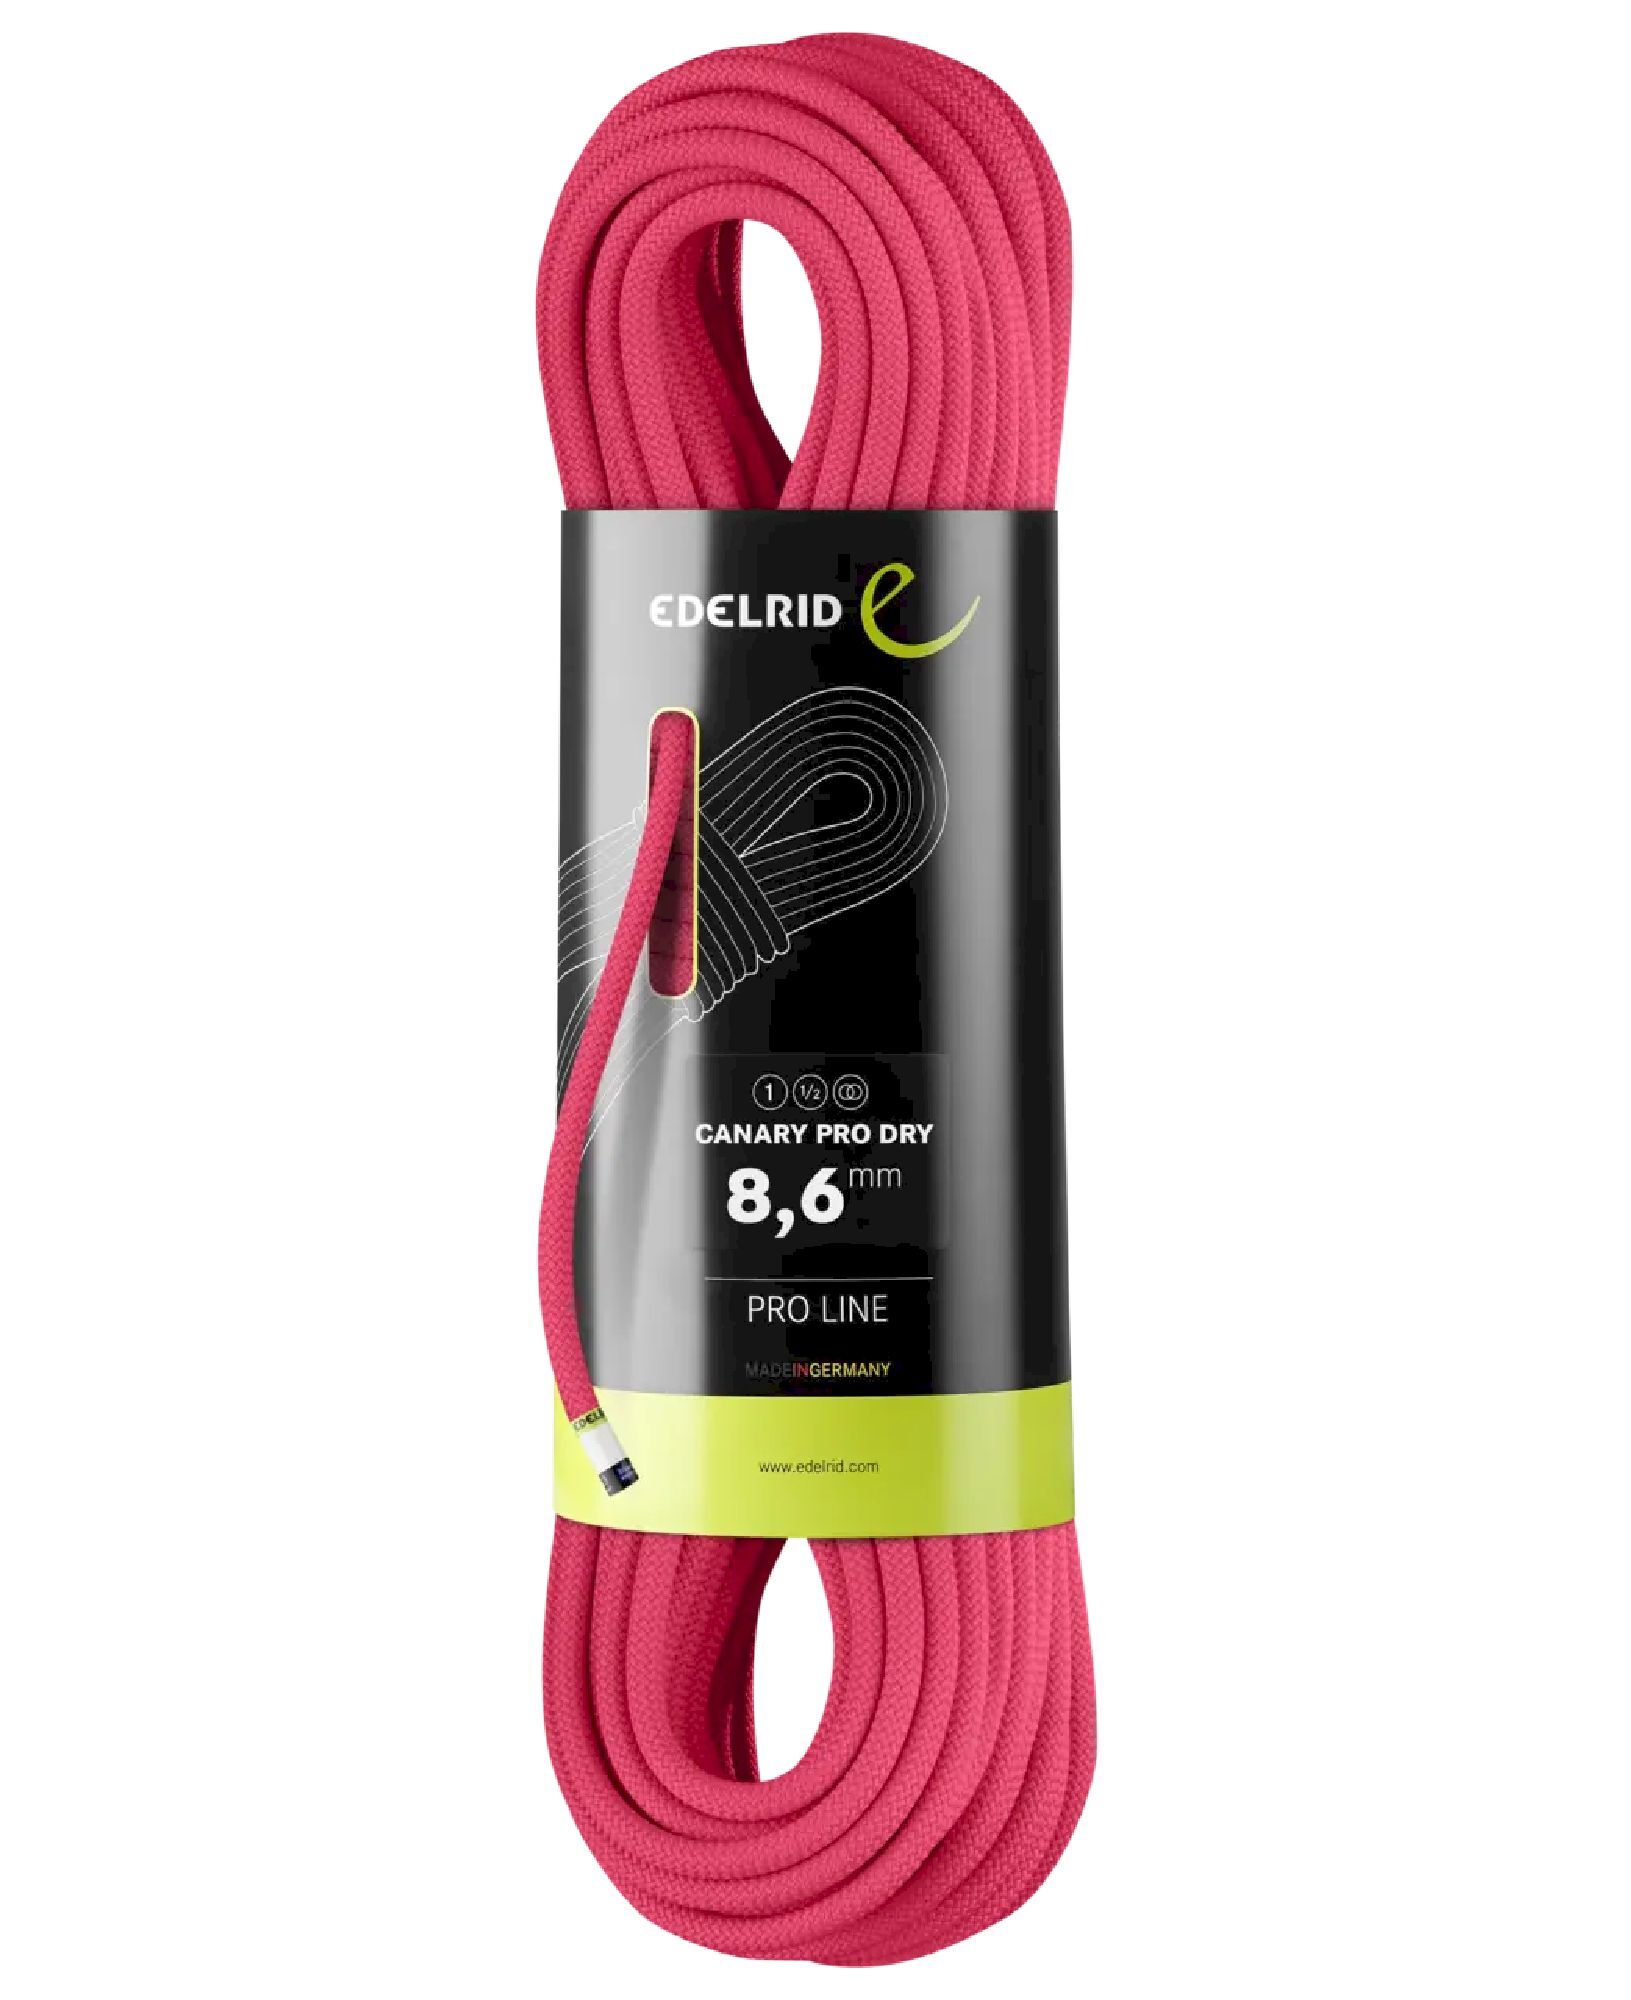 Edelrid Canary Pro Dry 8,6mm - Corde à double | Hardloop